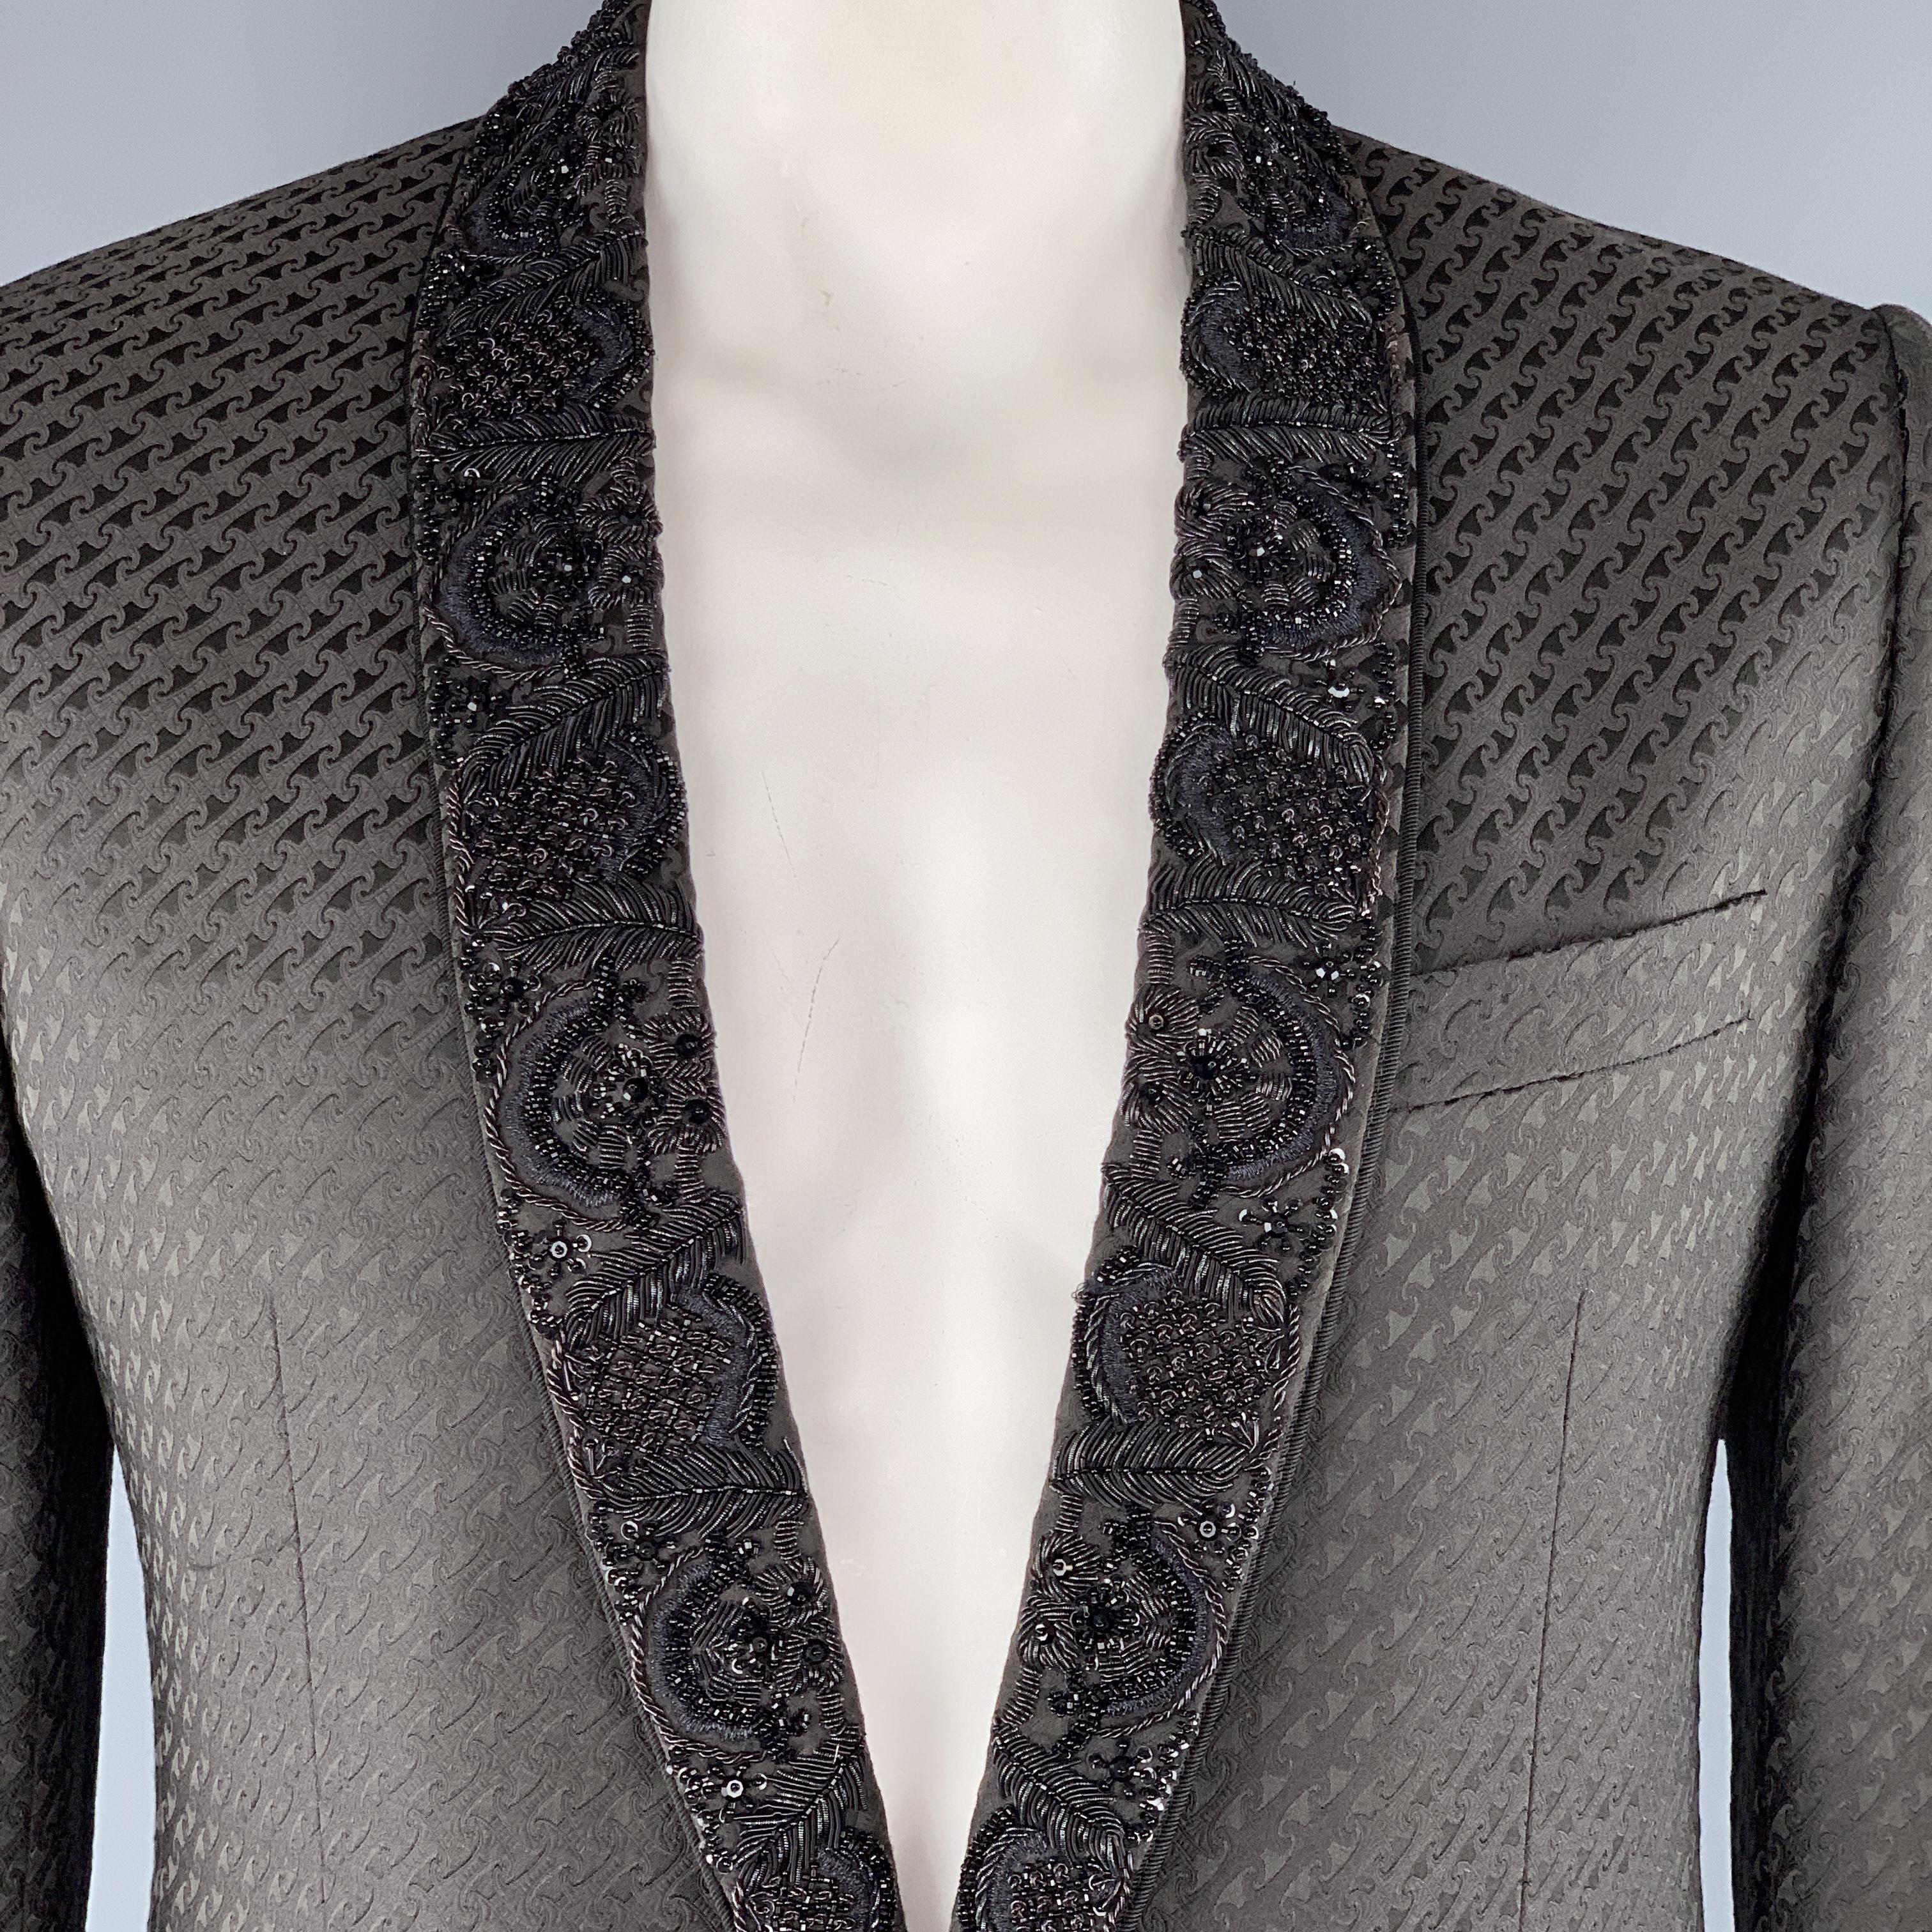 DOLE & GABBANA sport coat comes in taupe brown pattern jacquard with a single breasted, one button front, faile ribbon piping, and intricate floral beaded shawl collar lapel. Made in Italy.

Excellent Pre-Owned Condition.
Marked: IT